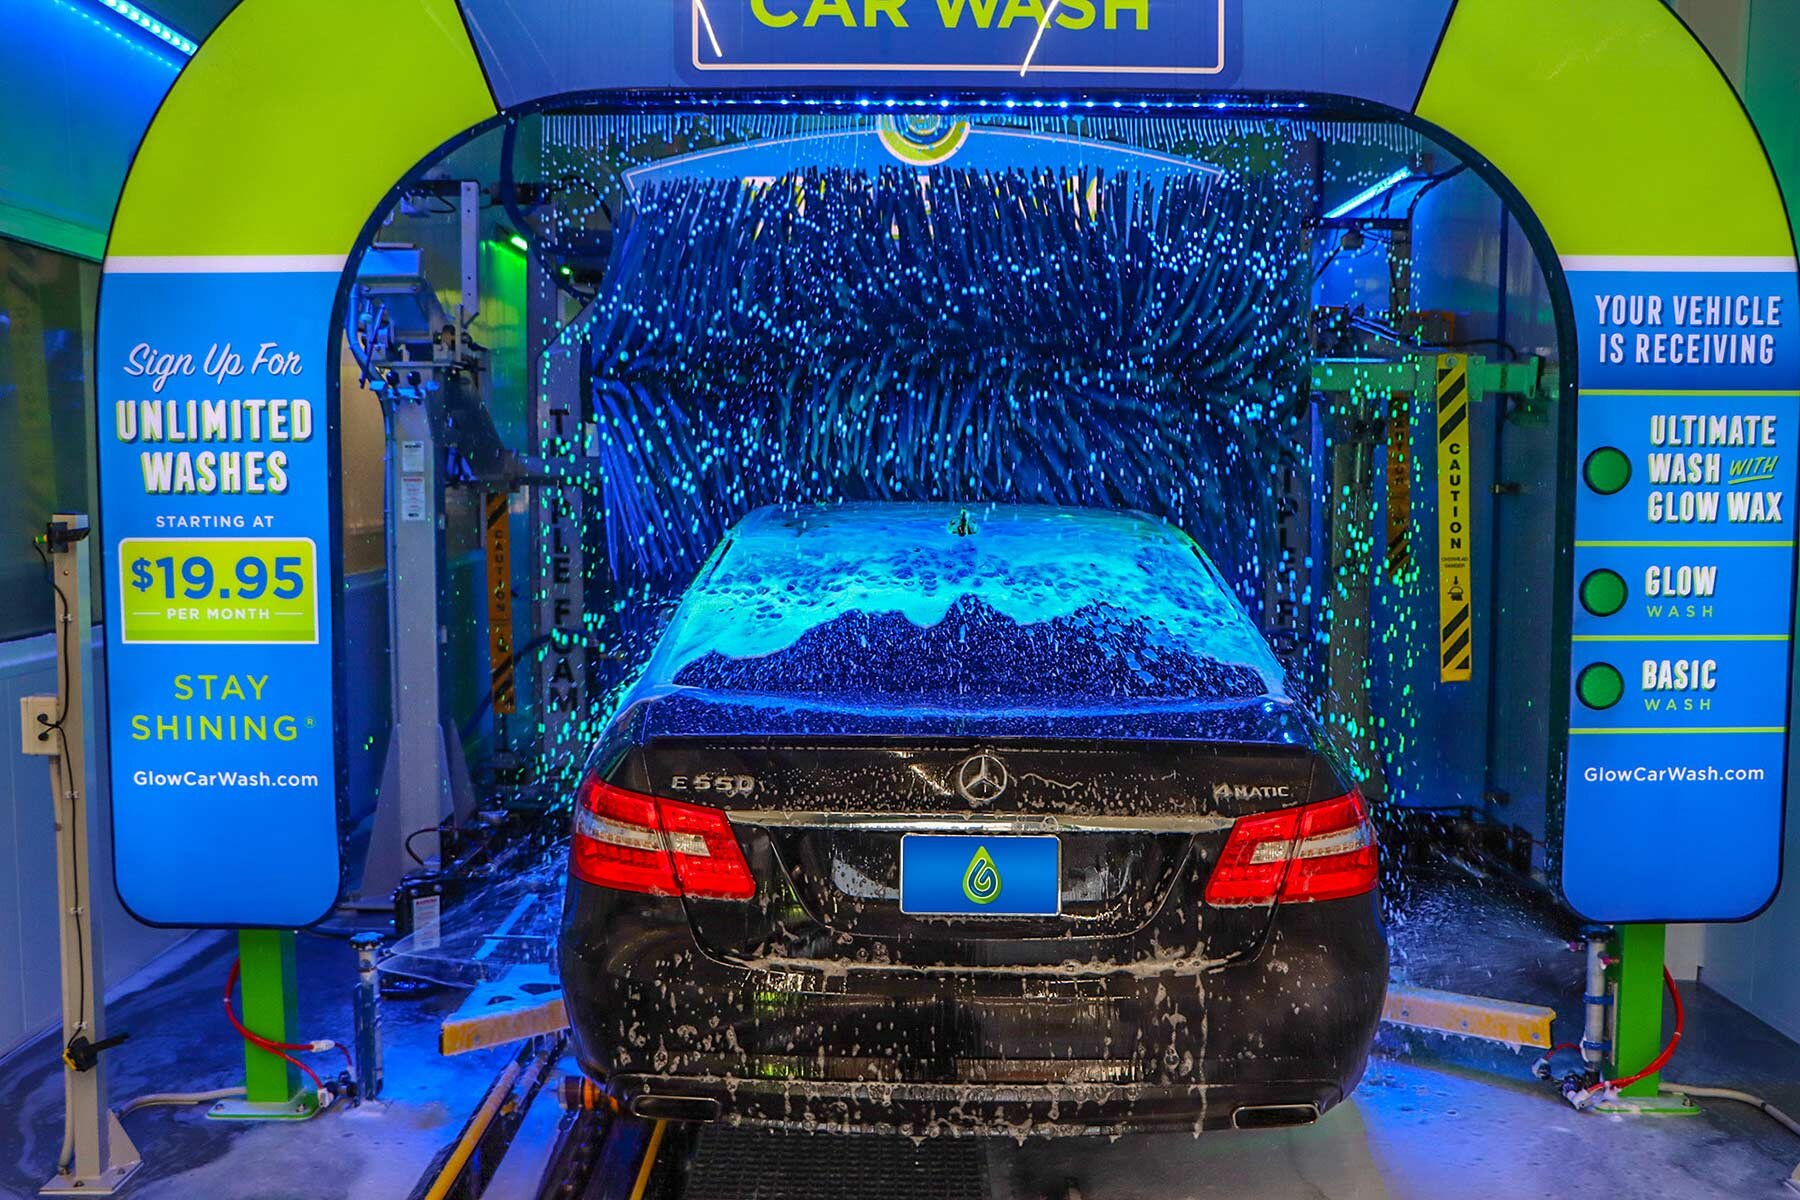 How Do You Wash Your Car At The Car Wash